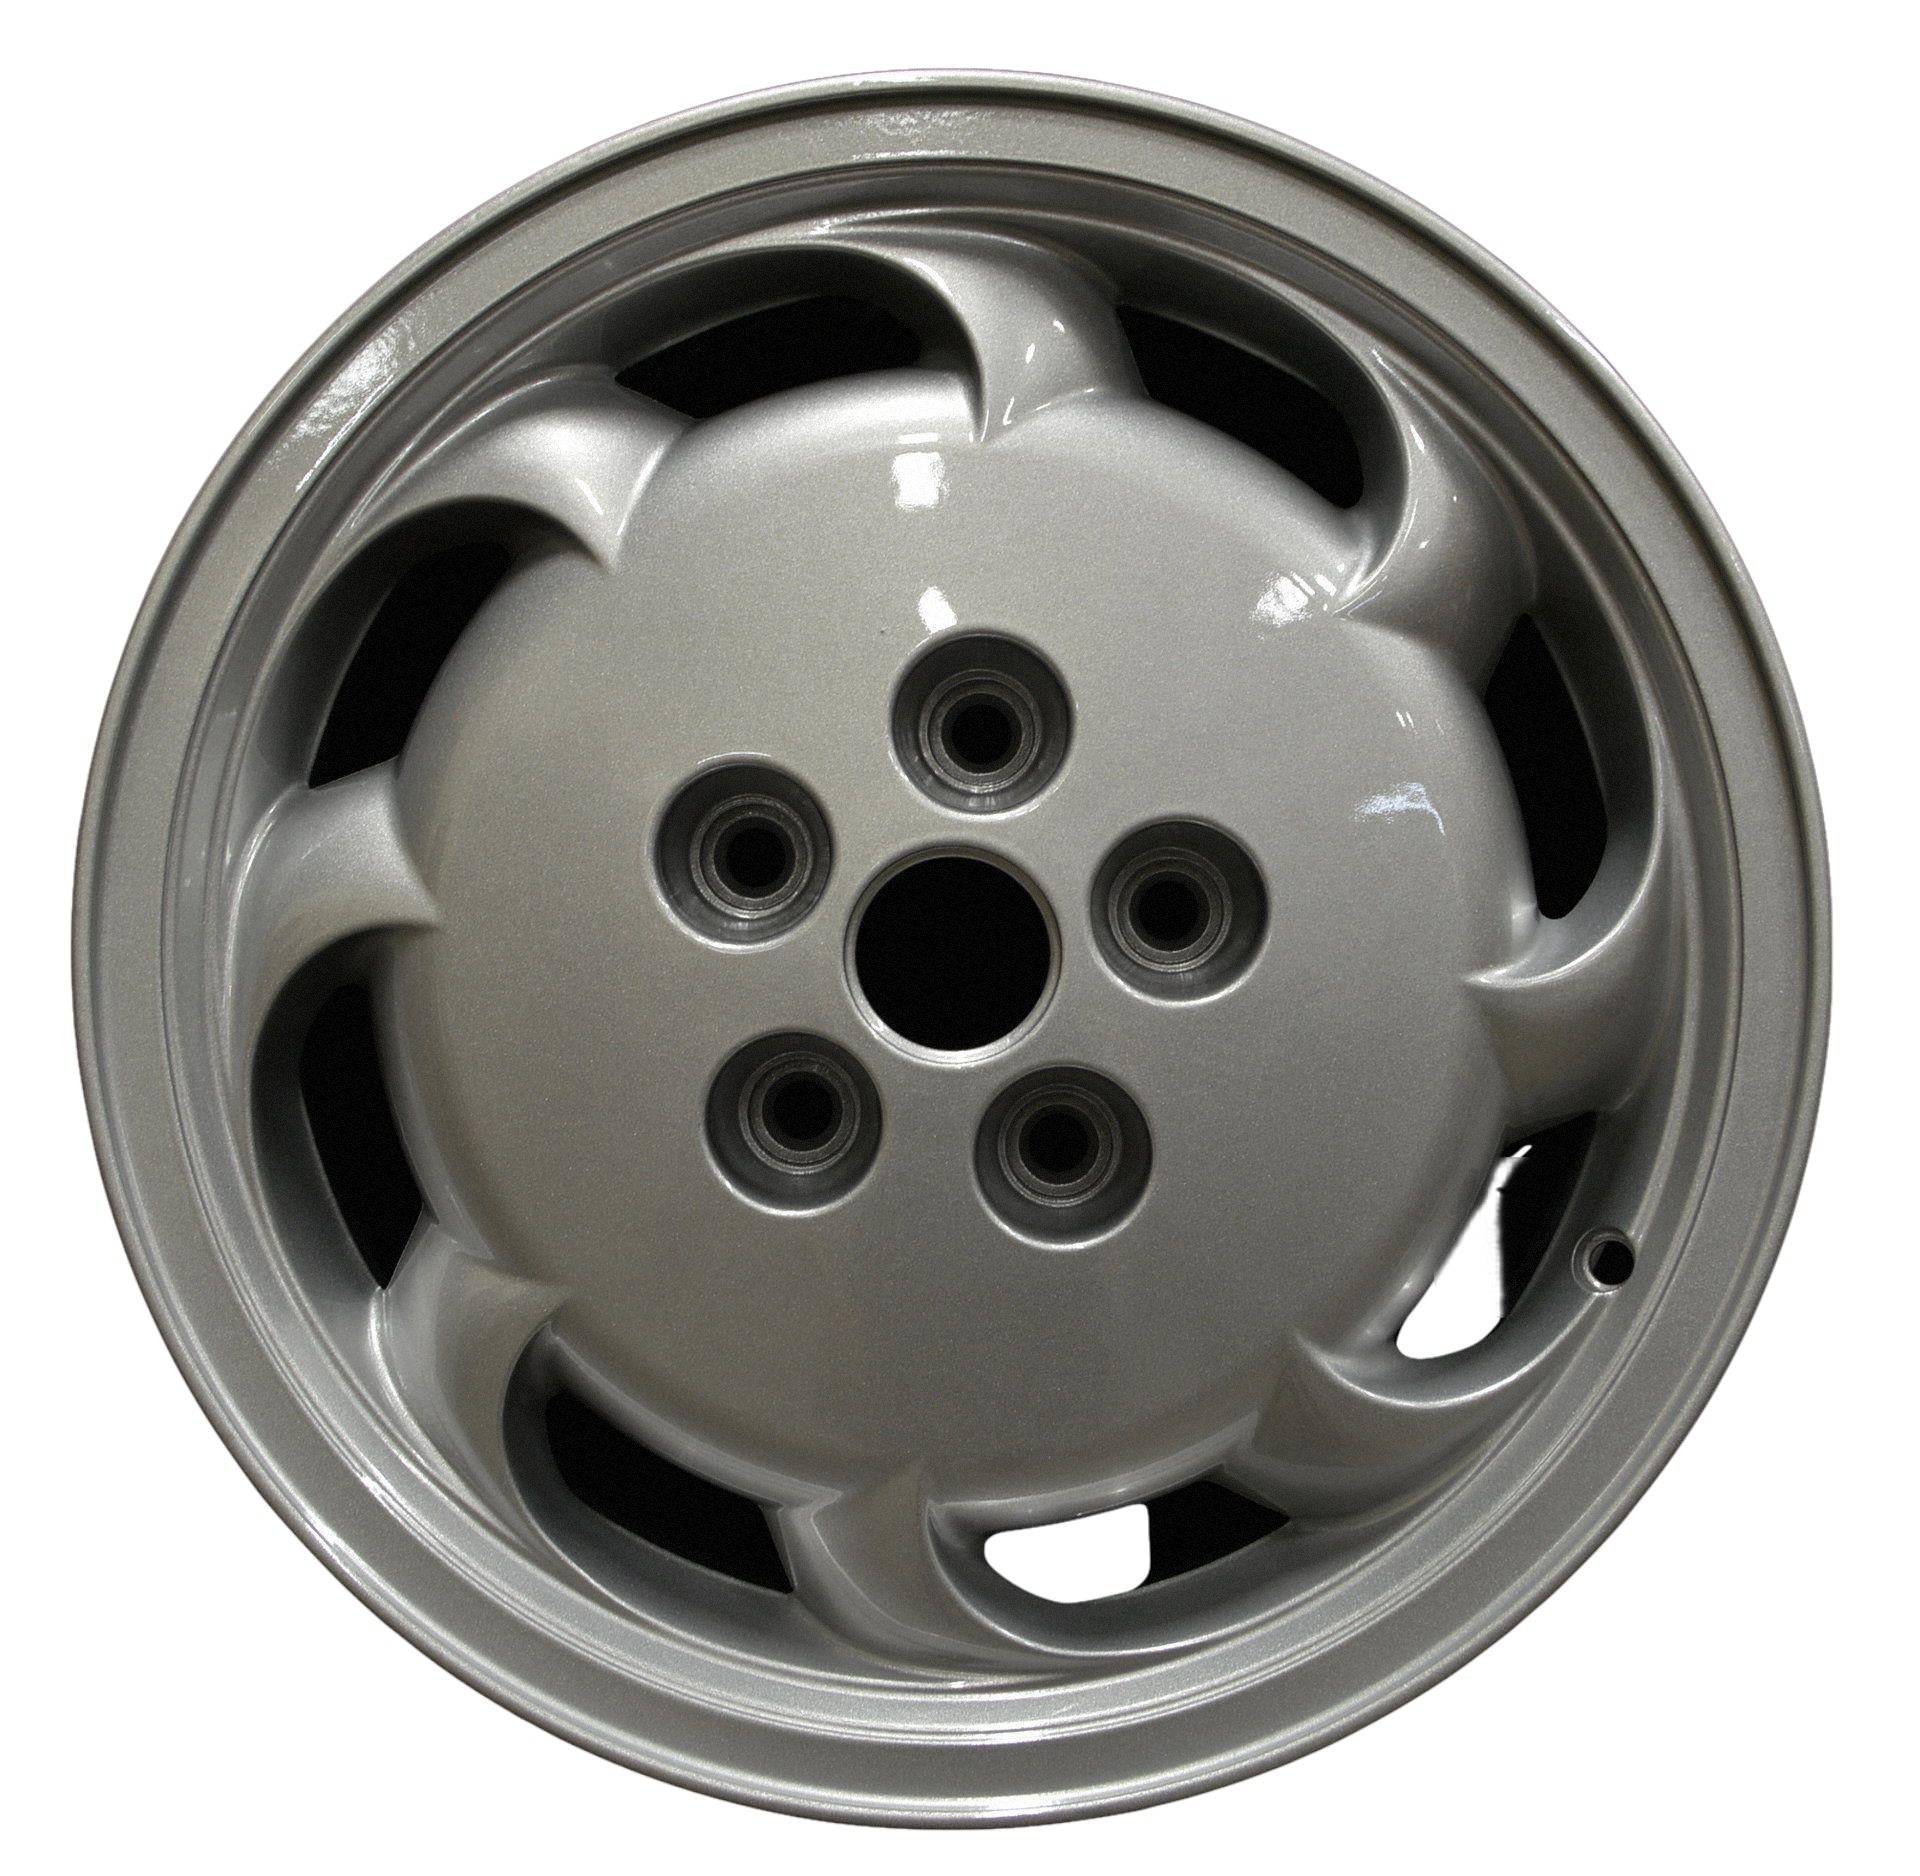 Oldsmobile 98  1992, 1993, 1994, 1995, 1996, 1997, 1998, 1999 Factory OEM Car Wheel Size 16x7 Alloy WAO.6007.PS02.FF